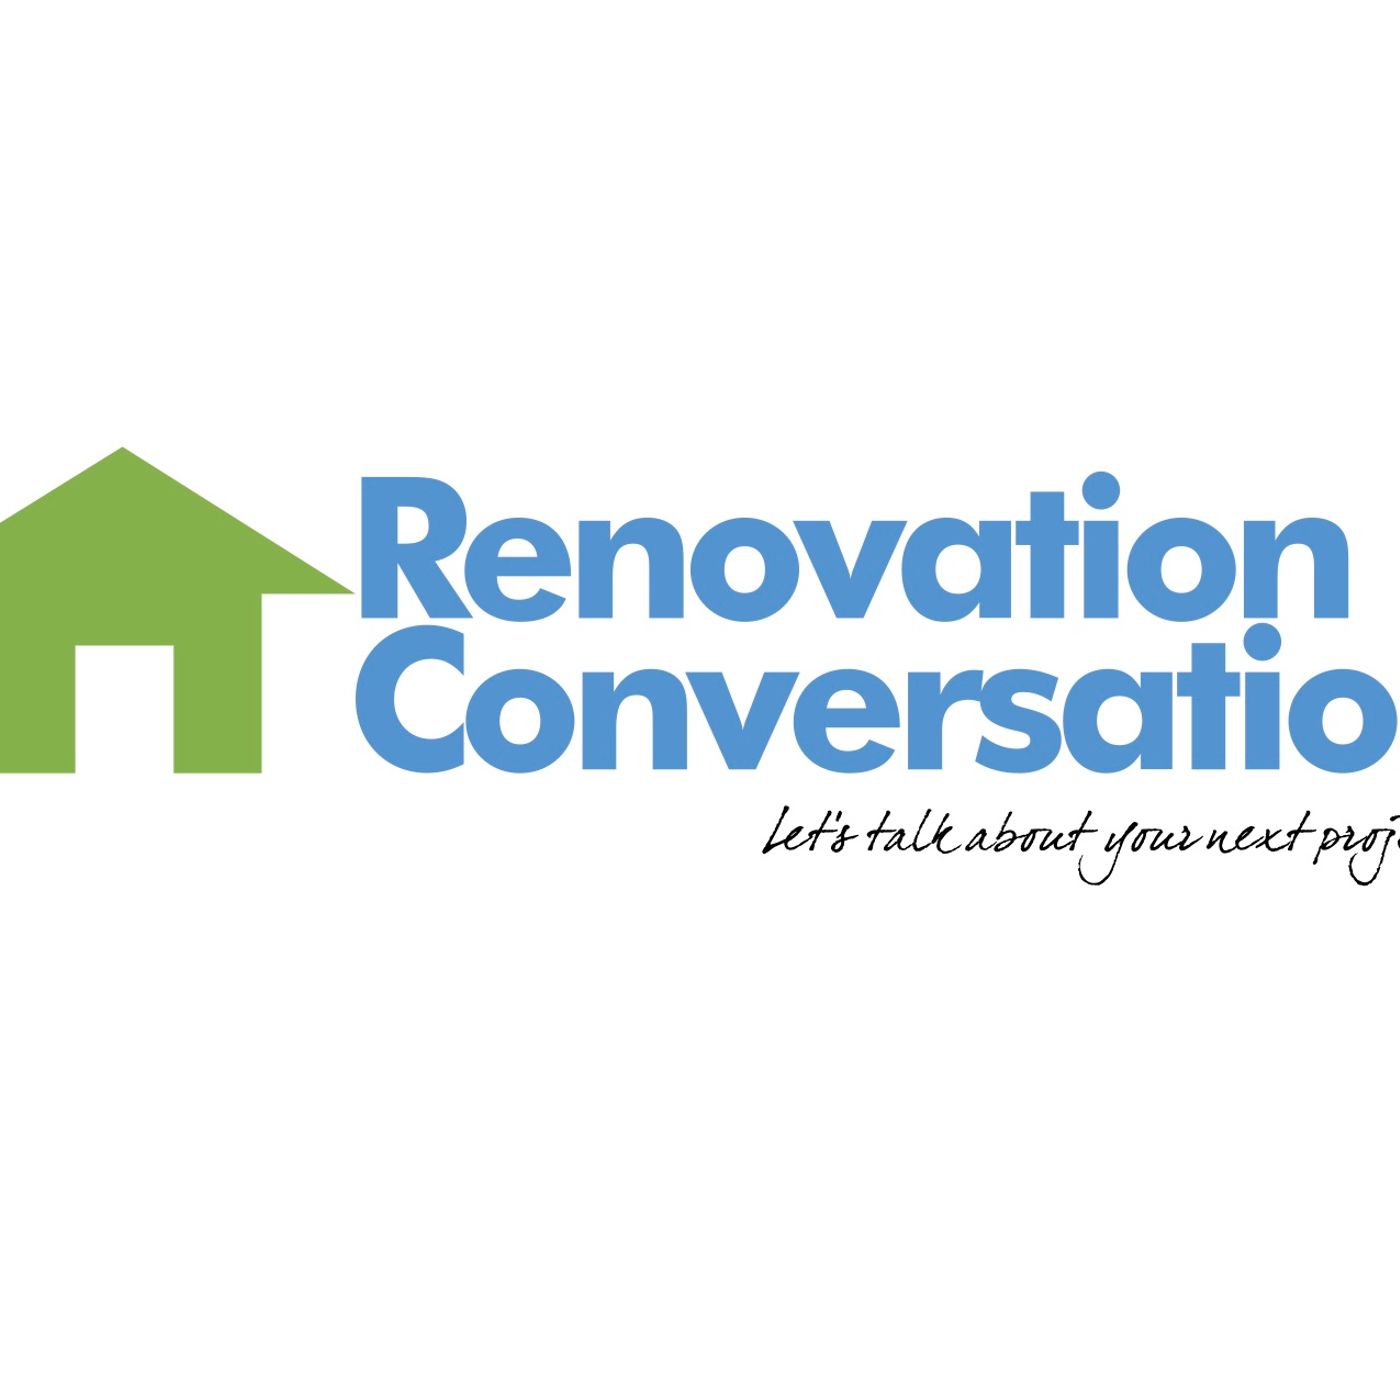 WELCOME TO THE RENOVATION CONVERSATION